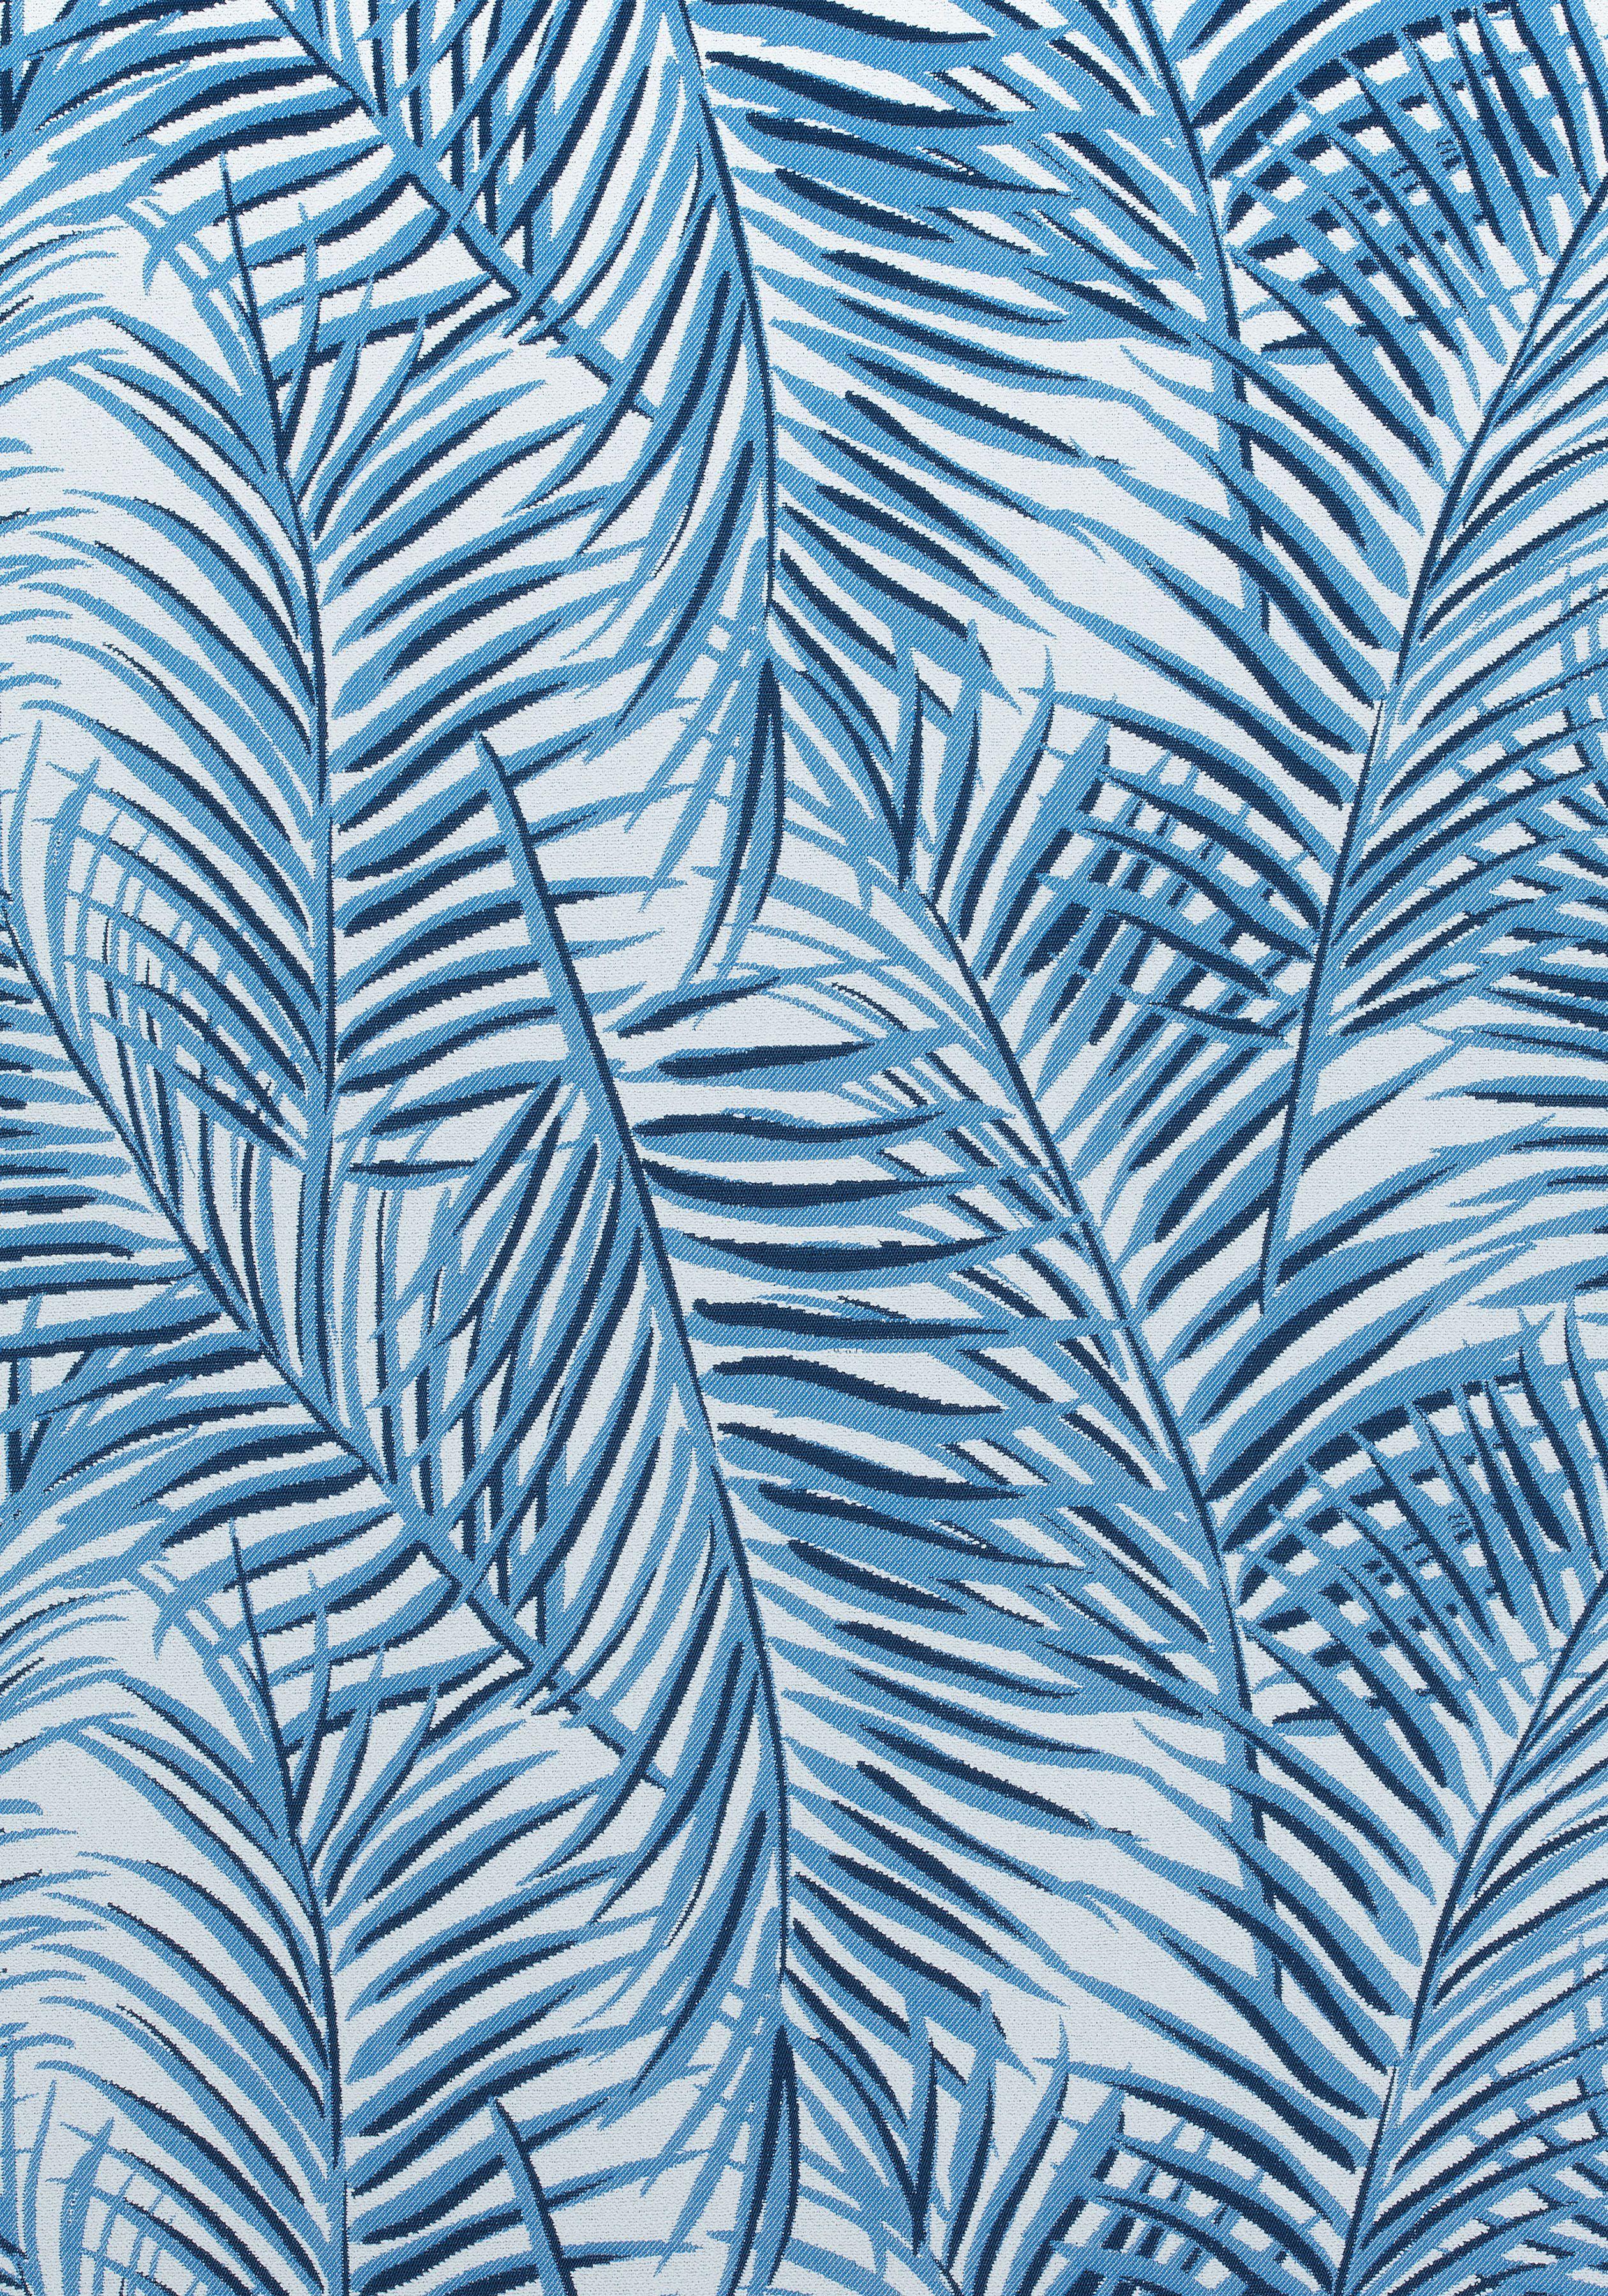 Blue Palm Tree Branch Removable Wallpaper  24 inch x 10ft  On Sale   Bed Bath  Beyond  37793025